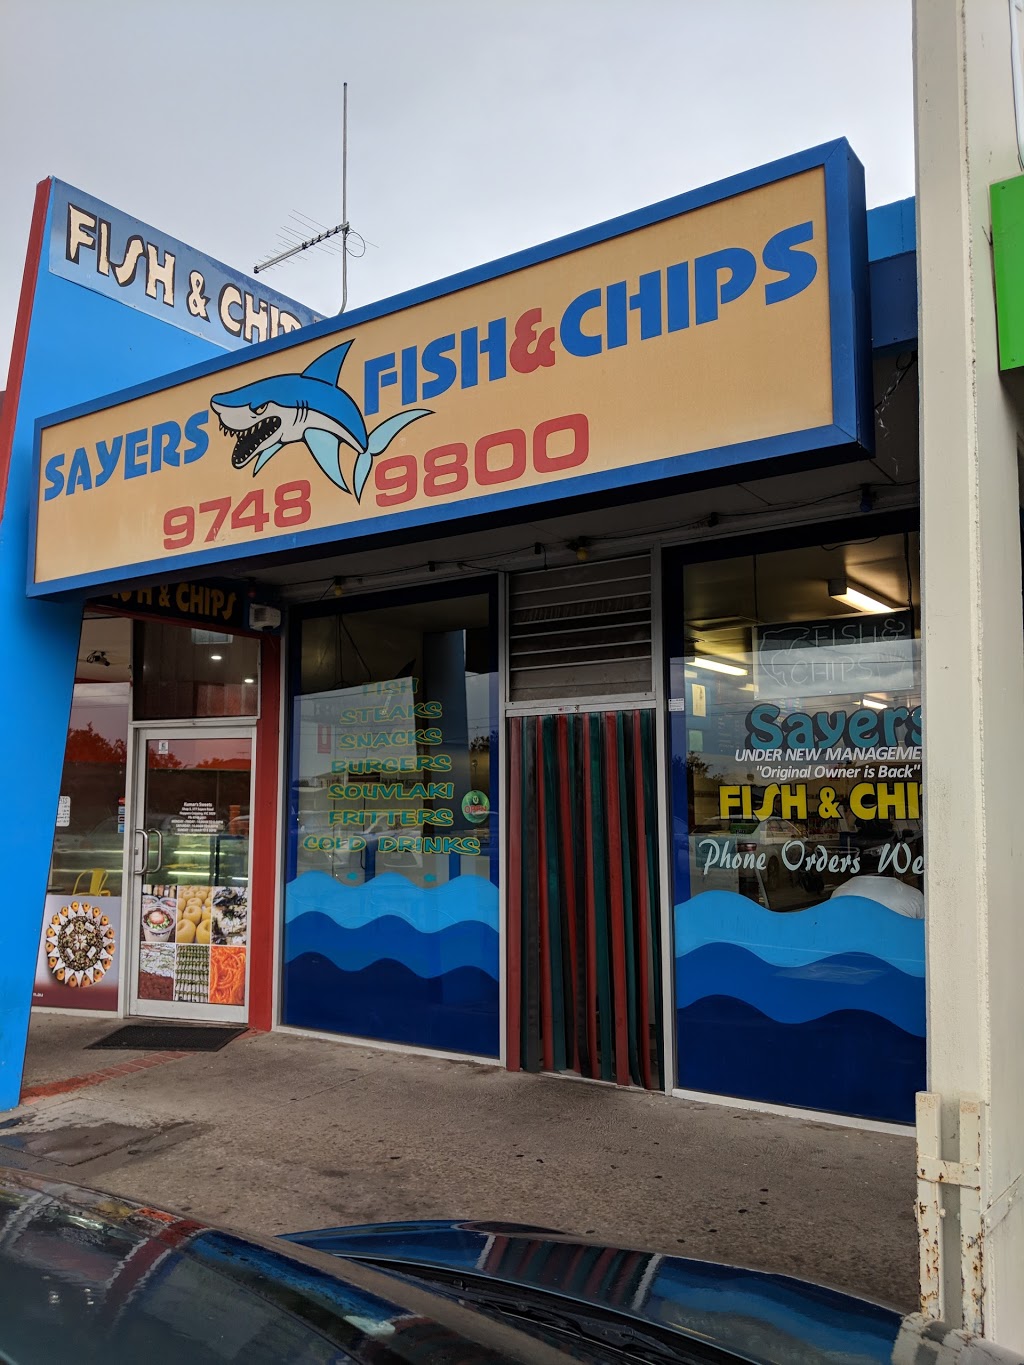 Sayers Road Fish & Chips | restaurant | 4/377 Sayers Rd, Hoppers Crossing VIC 3029, Australia | 0397489800 OR +61 3 9748 9800